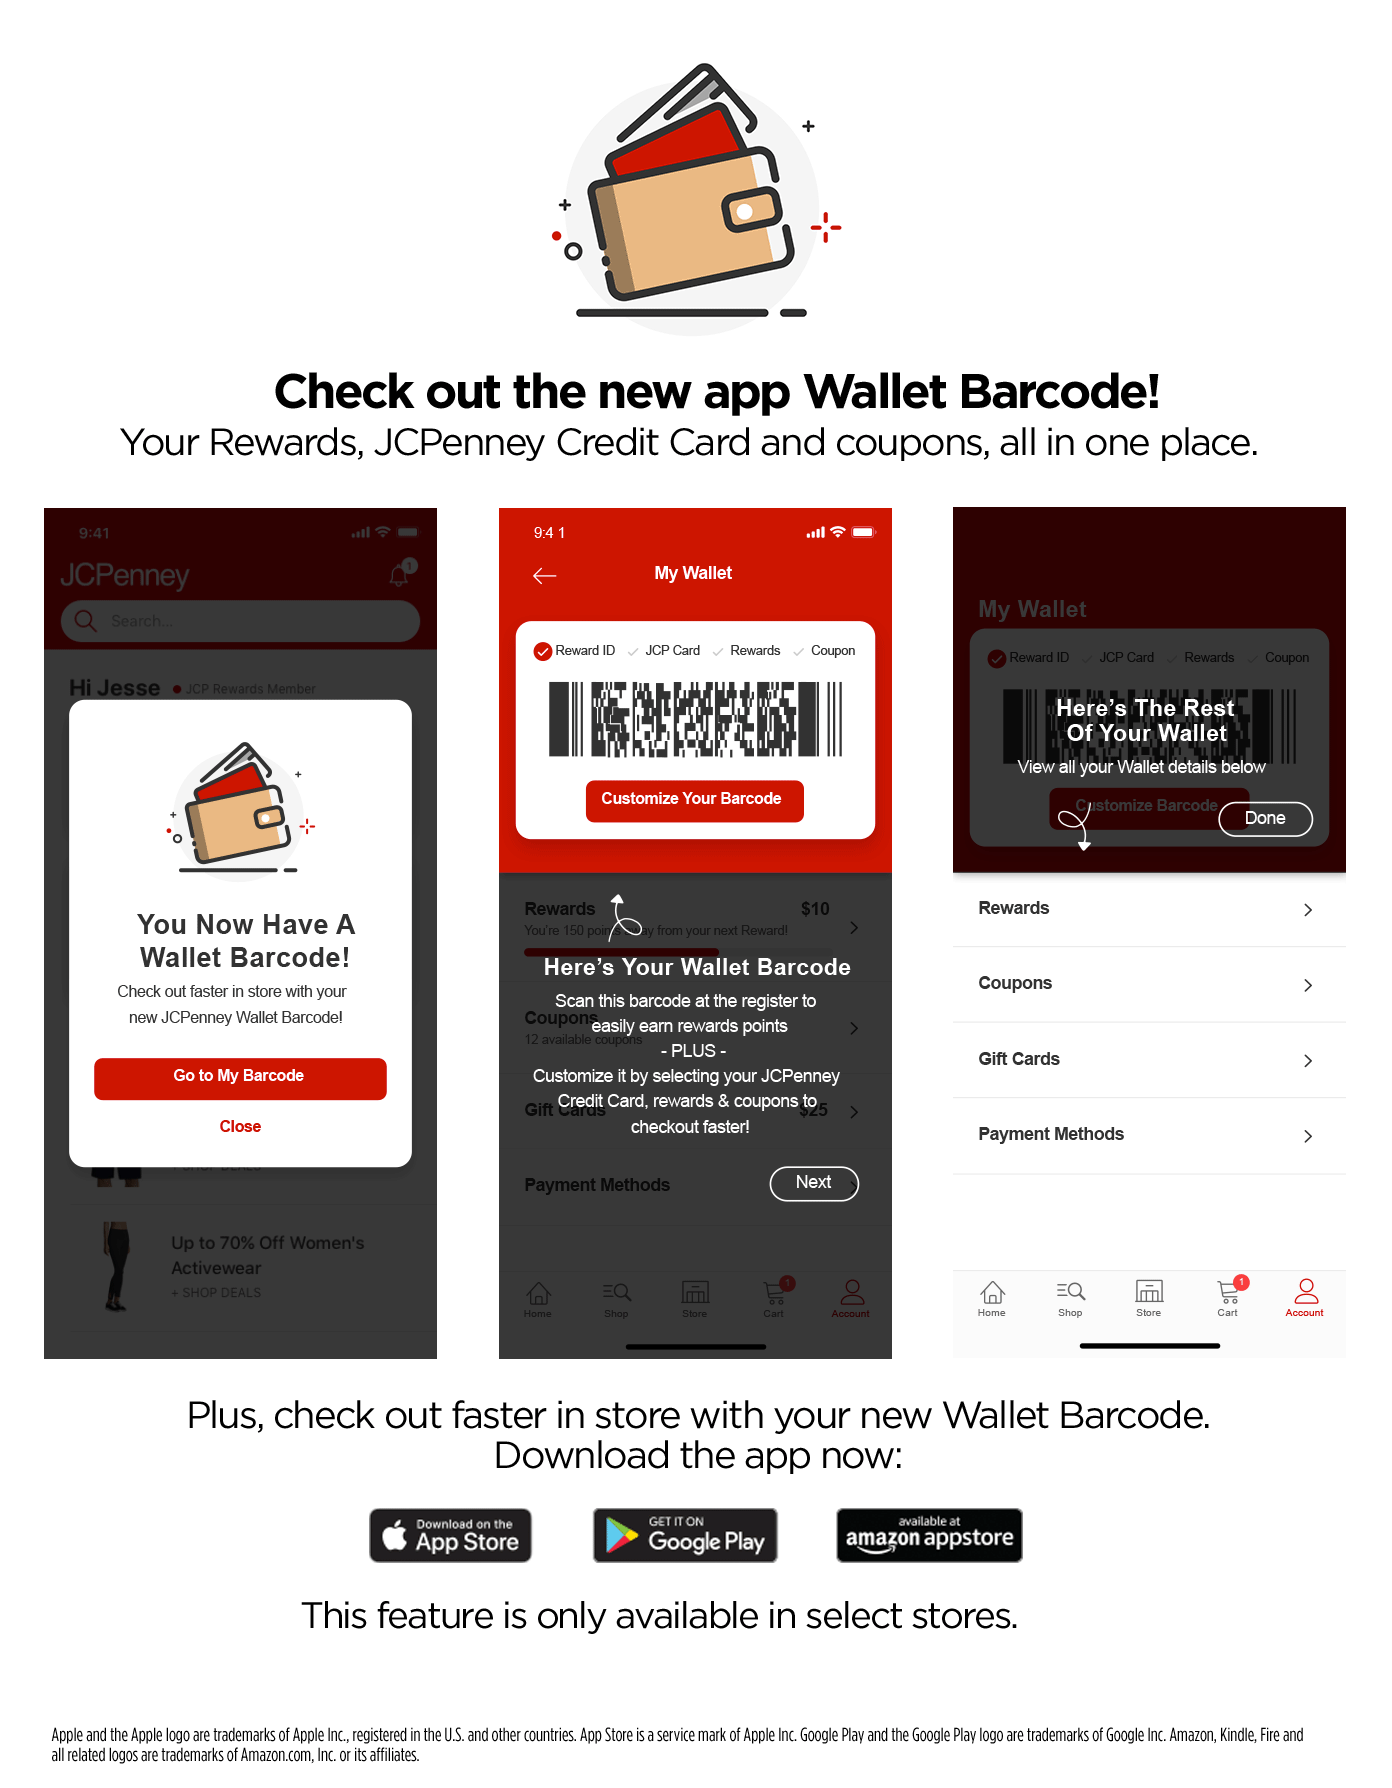 Check out the new app wallet barcode